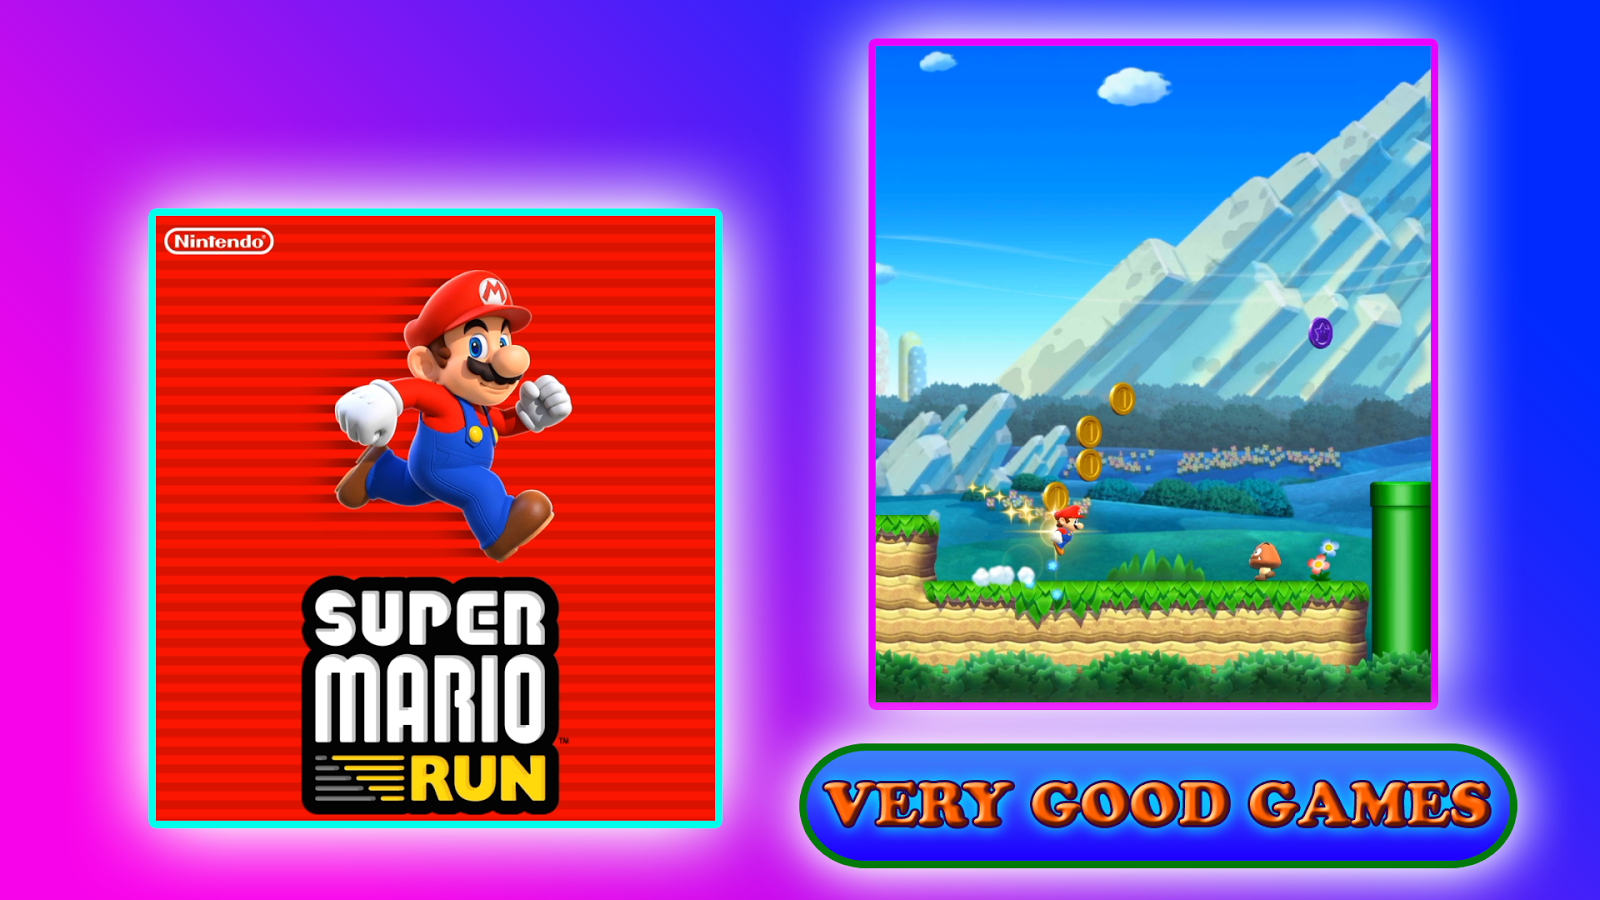 Review of Super Mario Run on the blog for smart gamers